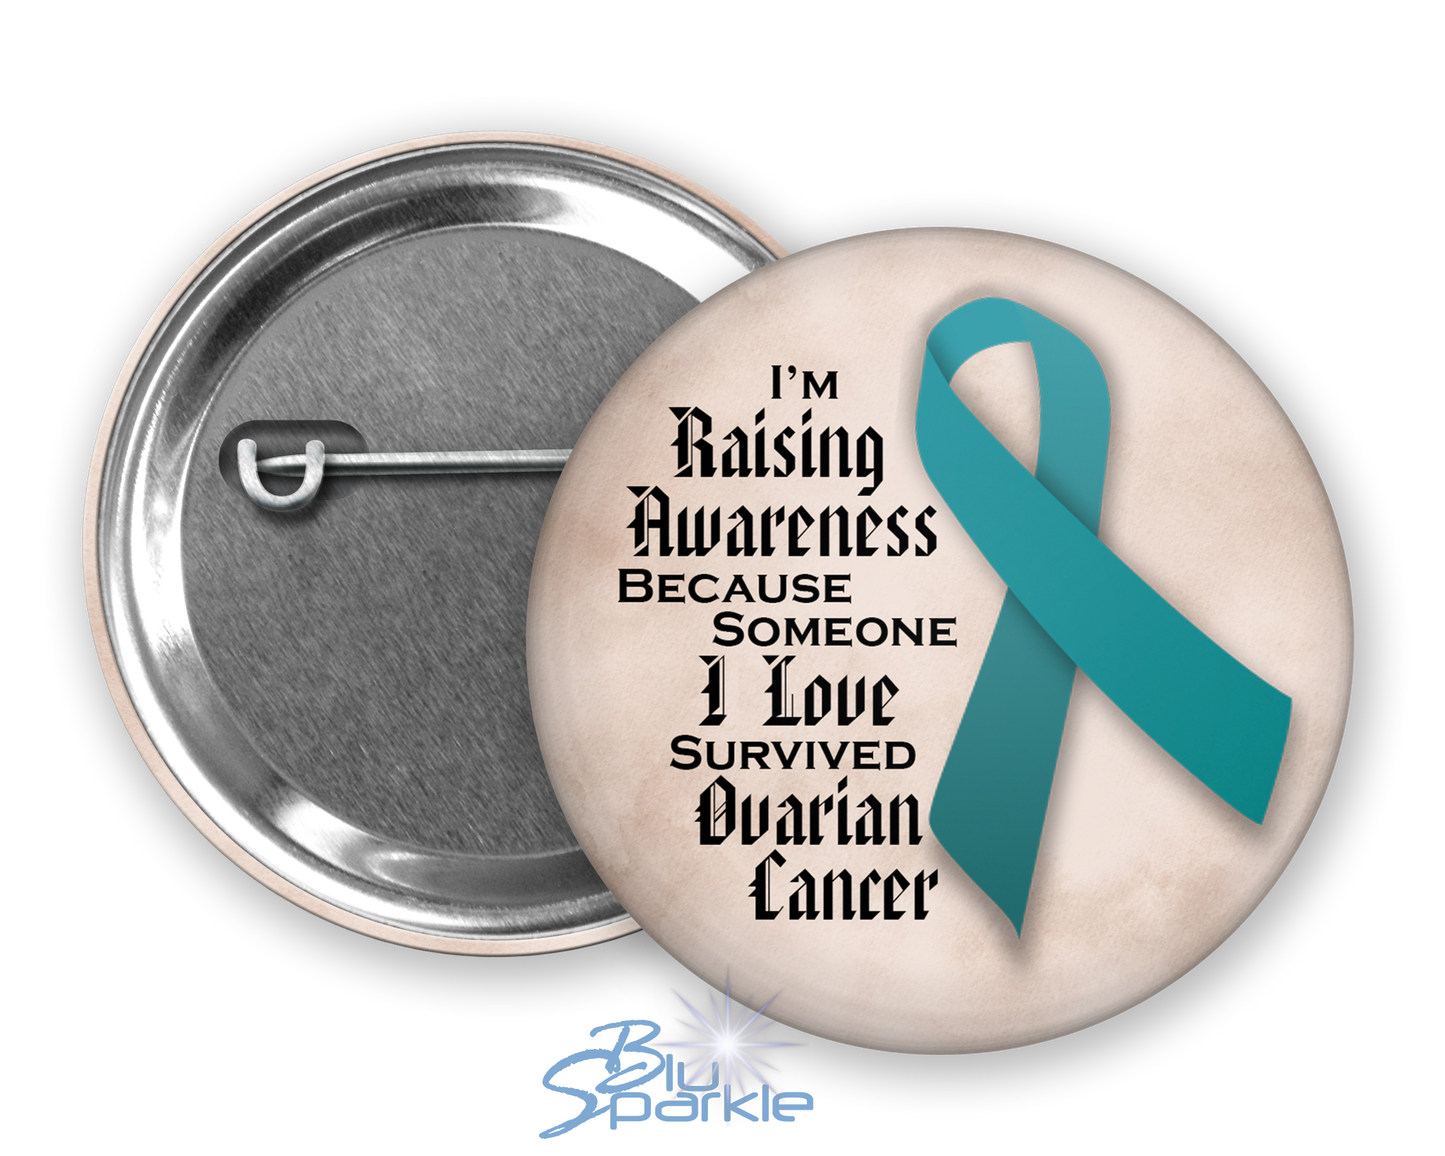 I'm Raising Awareness Because Someone I Love Died From (Has, Survived) Ovarian Cancer Pinback Button |x|